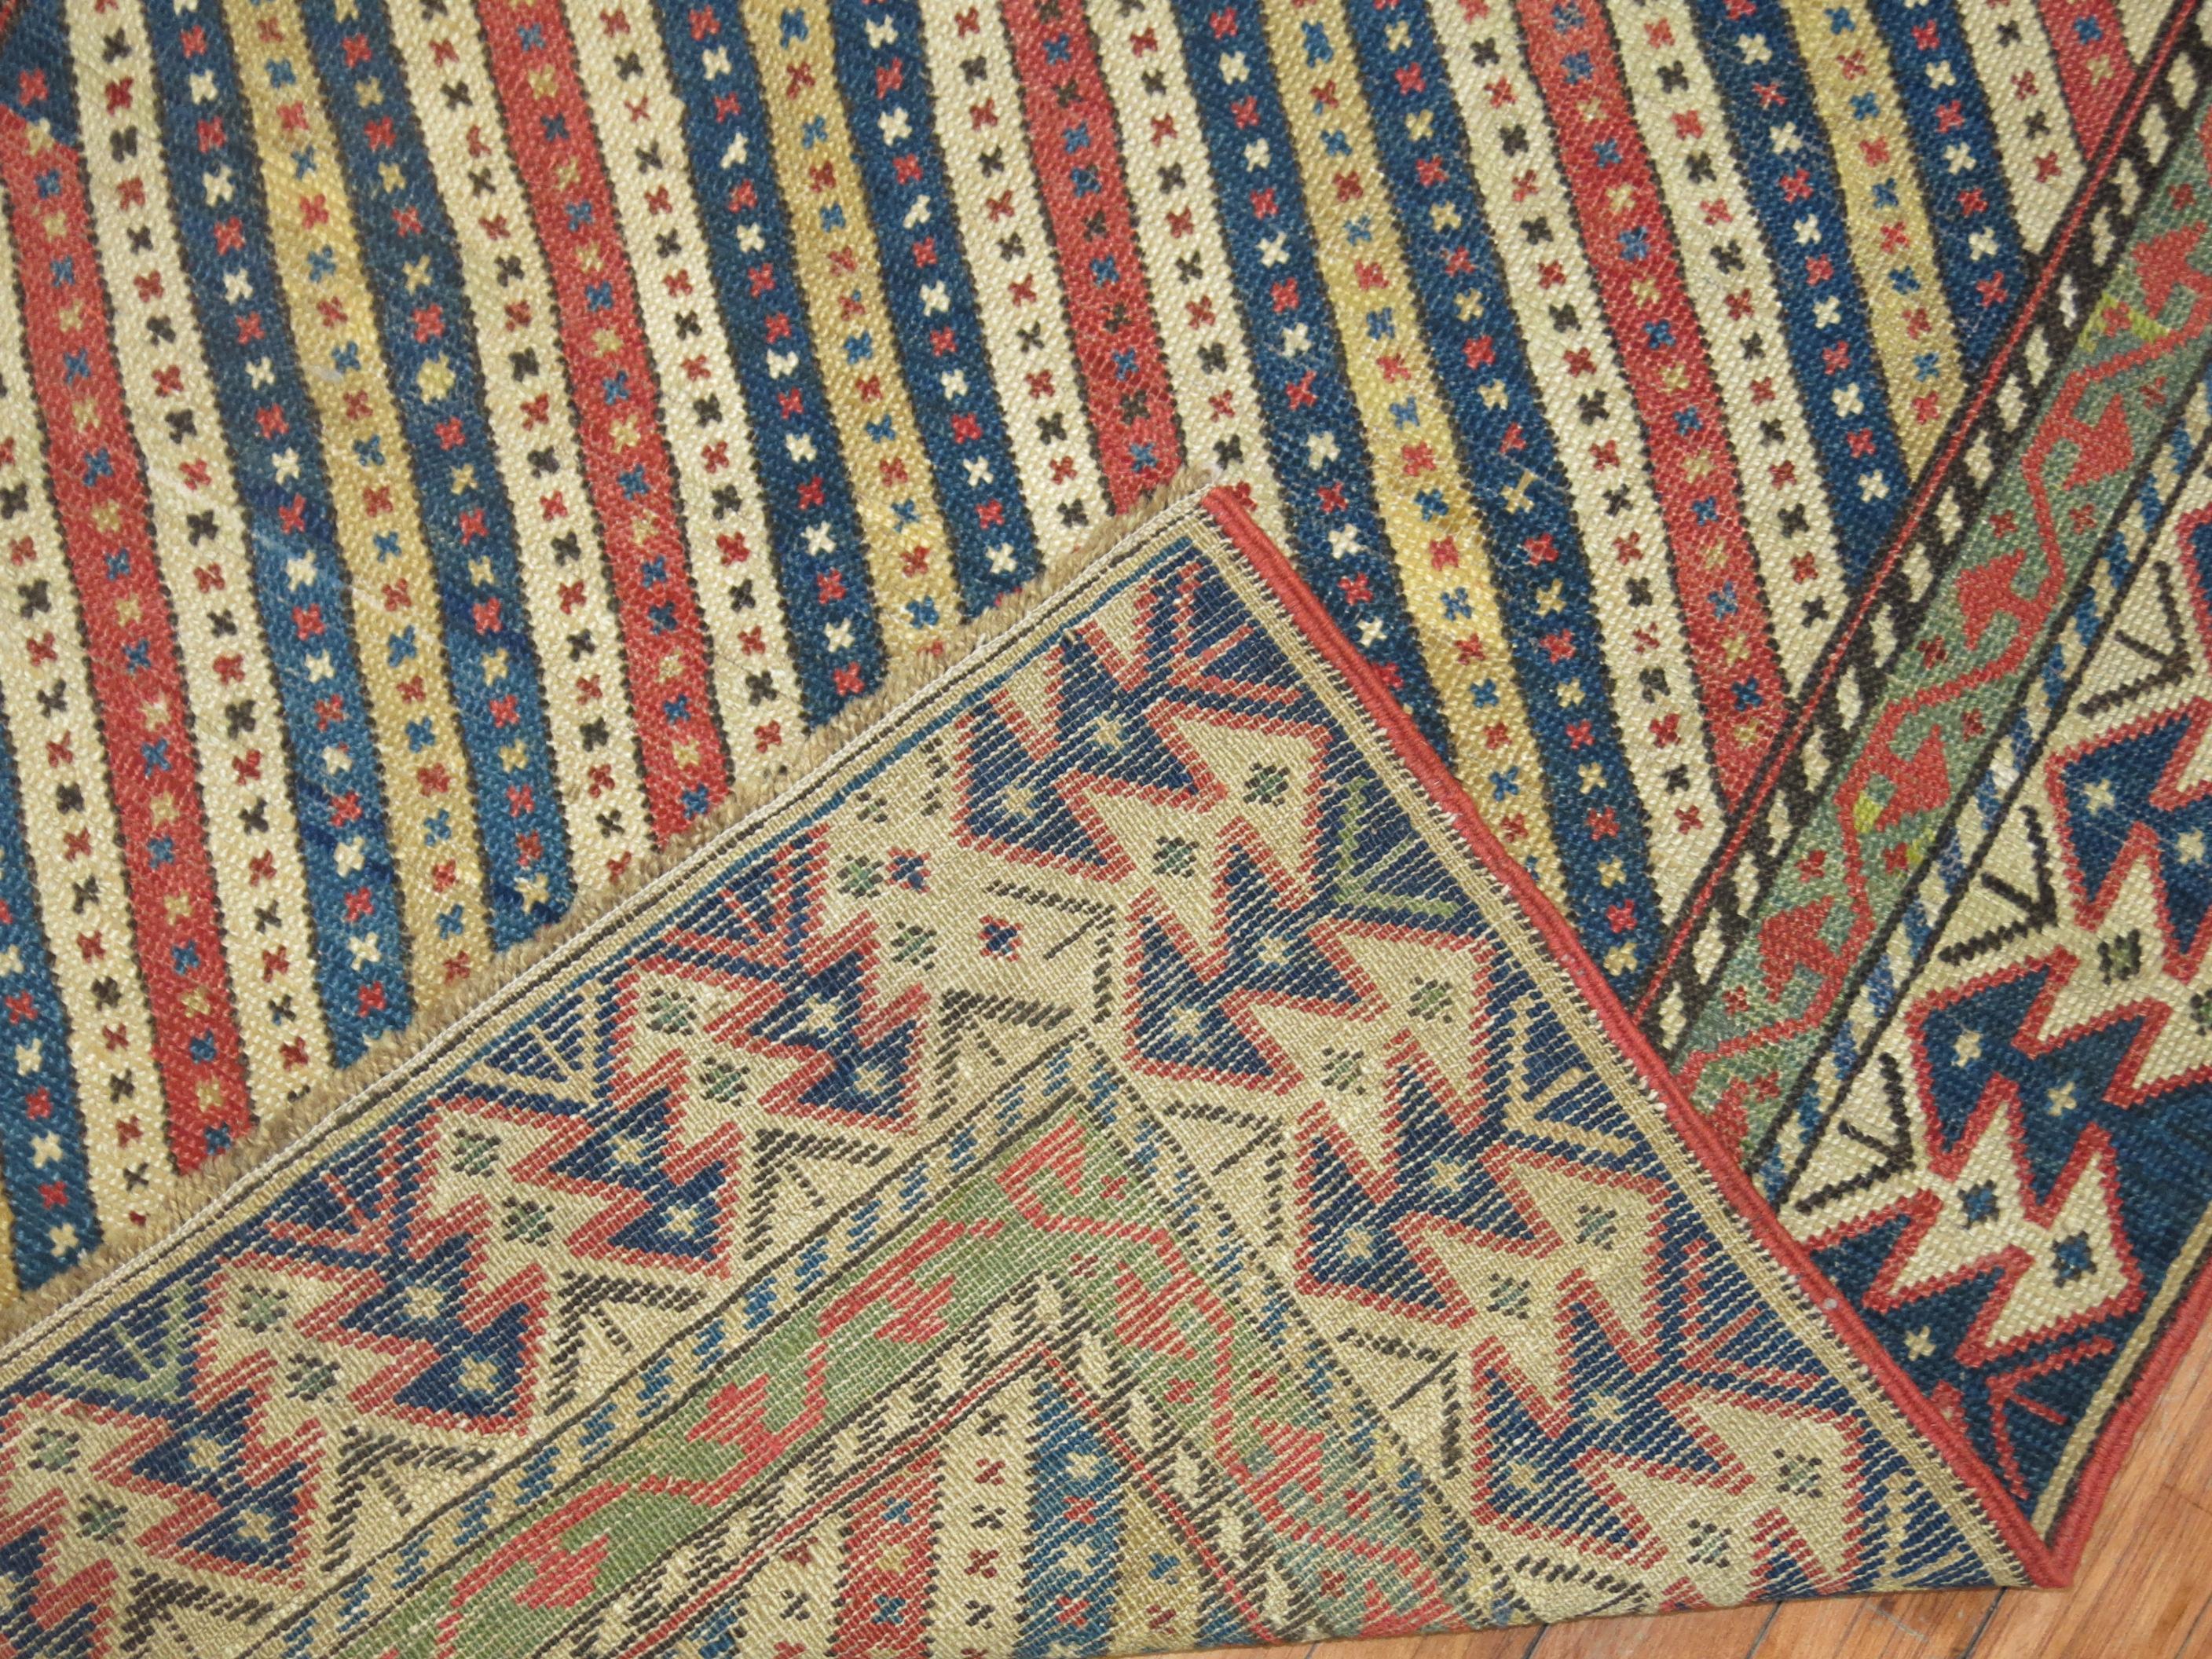 A 19th century Caucasian Kuba runner. Colors and dyes all original. Very tightly woven.

The town of Kuba located in the caucases villages was a collection point for rugs from the eponymous mountainous region, due to its location on the